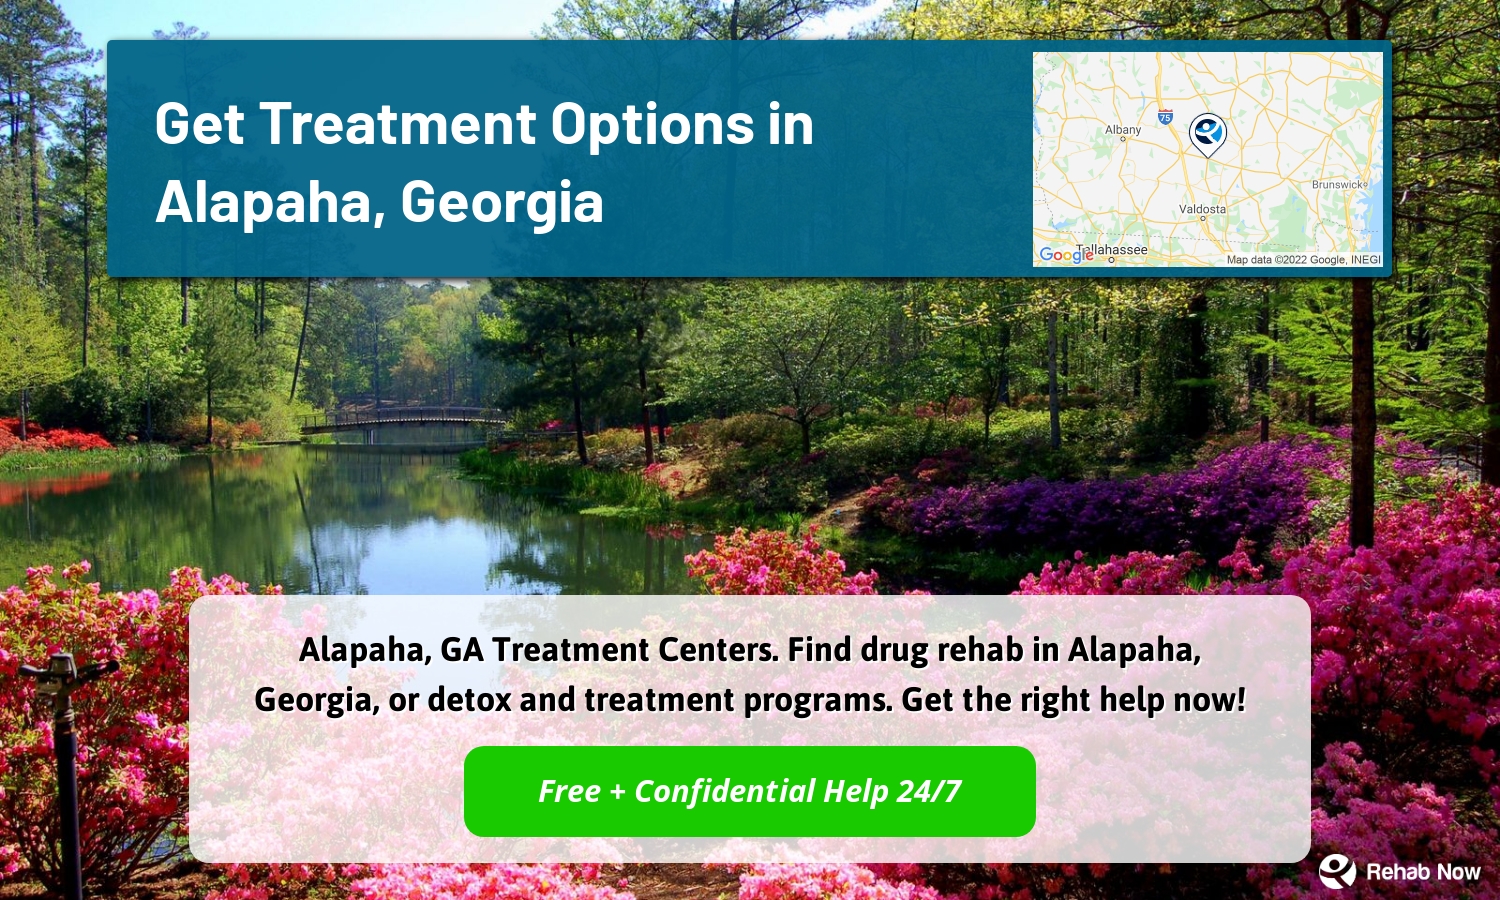 Alapaha, GA Treatment Centers. Find drug rehab in Alapaha, Georgia, or detox and treatment programs. Get the right help now!